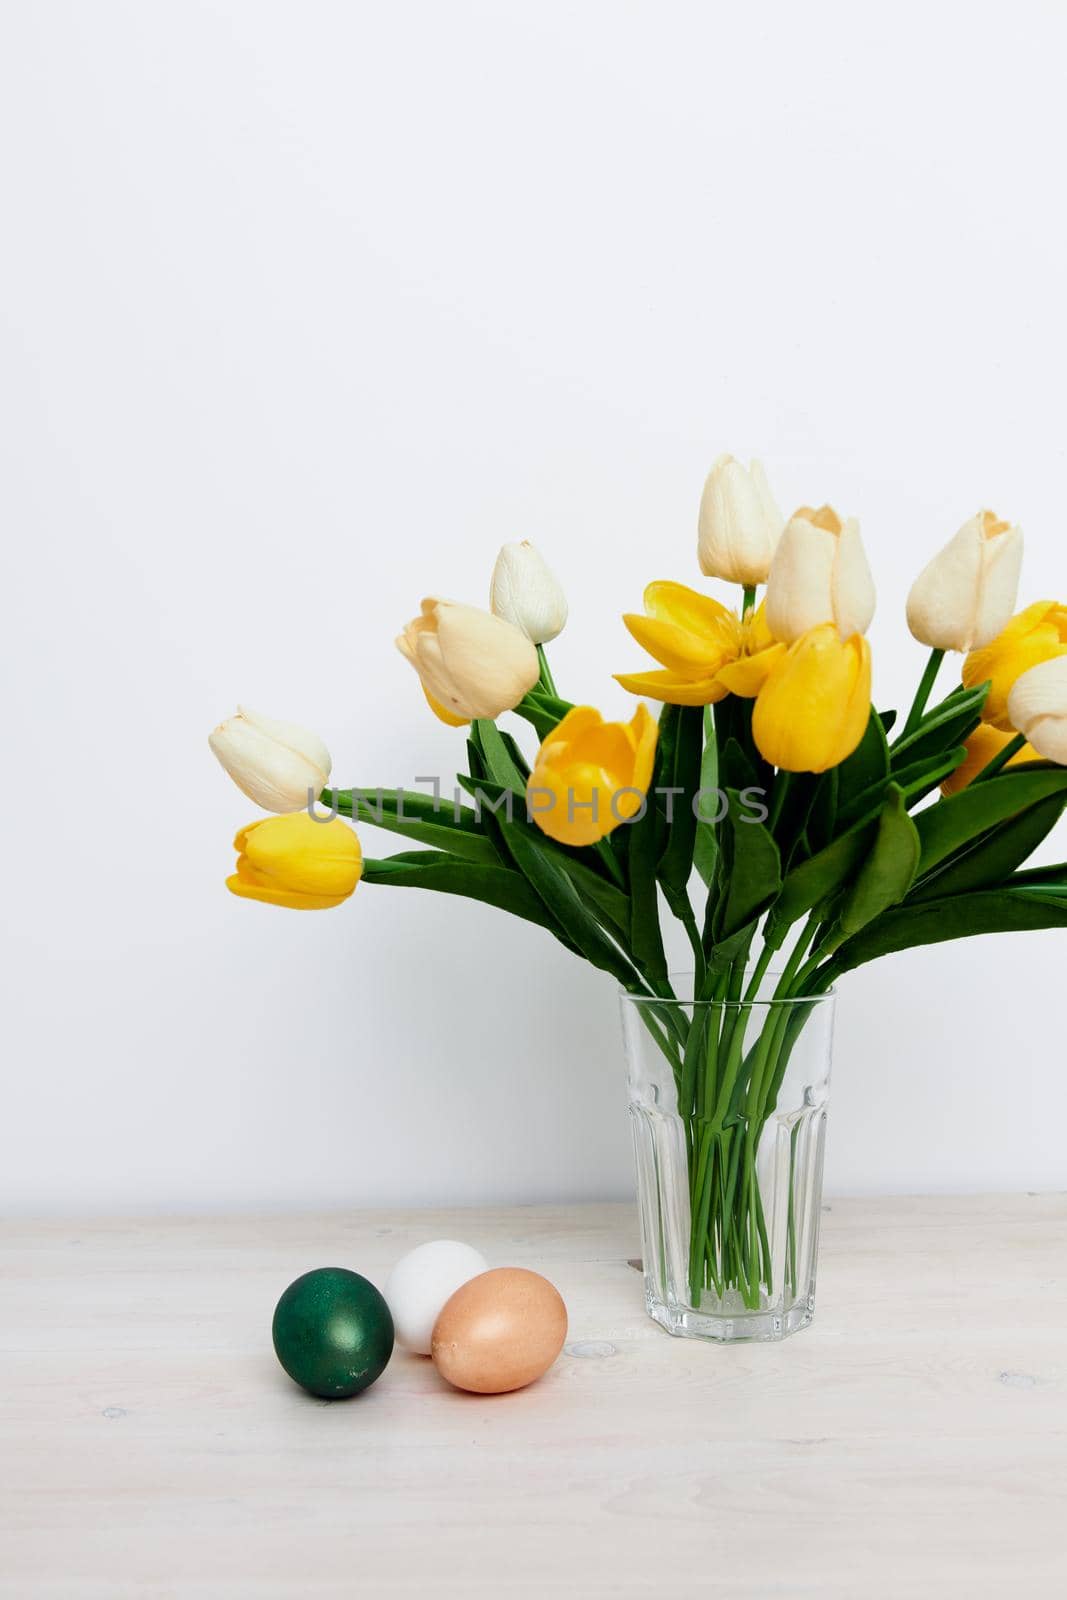 Easter eggs on the table and yellow tulips in a vase Copy Space by SHOTPRIME